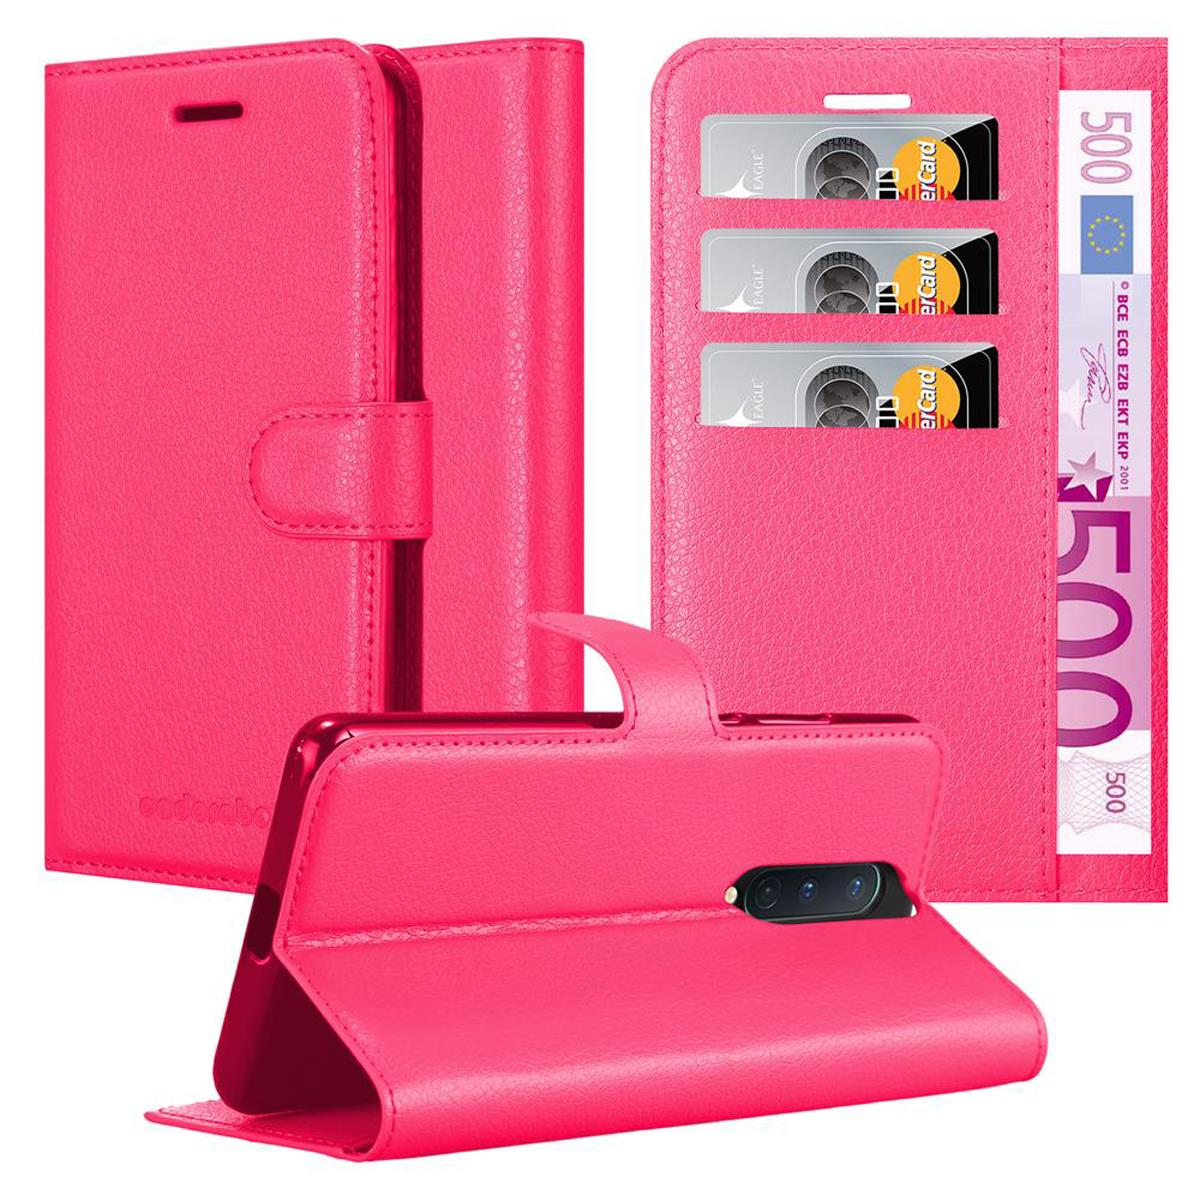 Hülle Bookcover, CADORABO PINK Standfunktion, CHERRY 8, Book OnePlus,